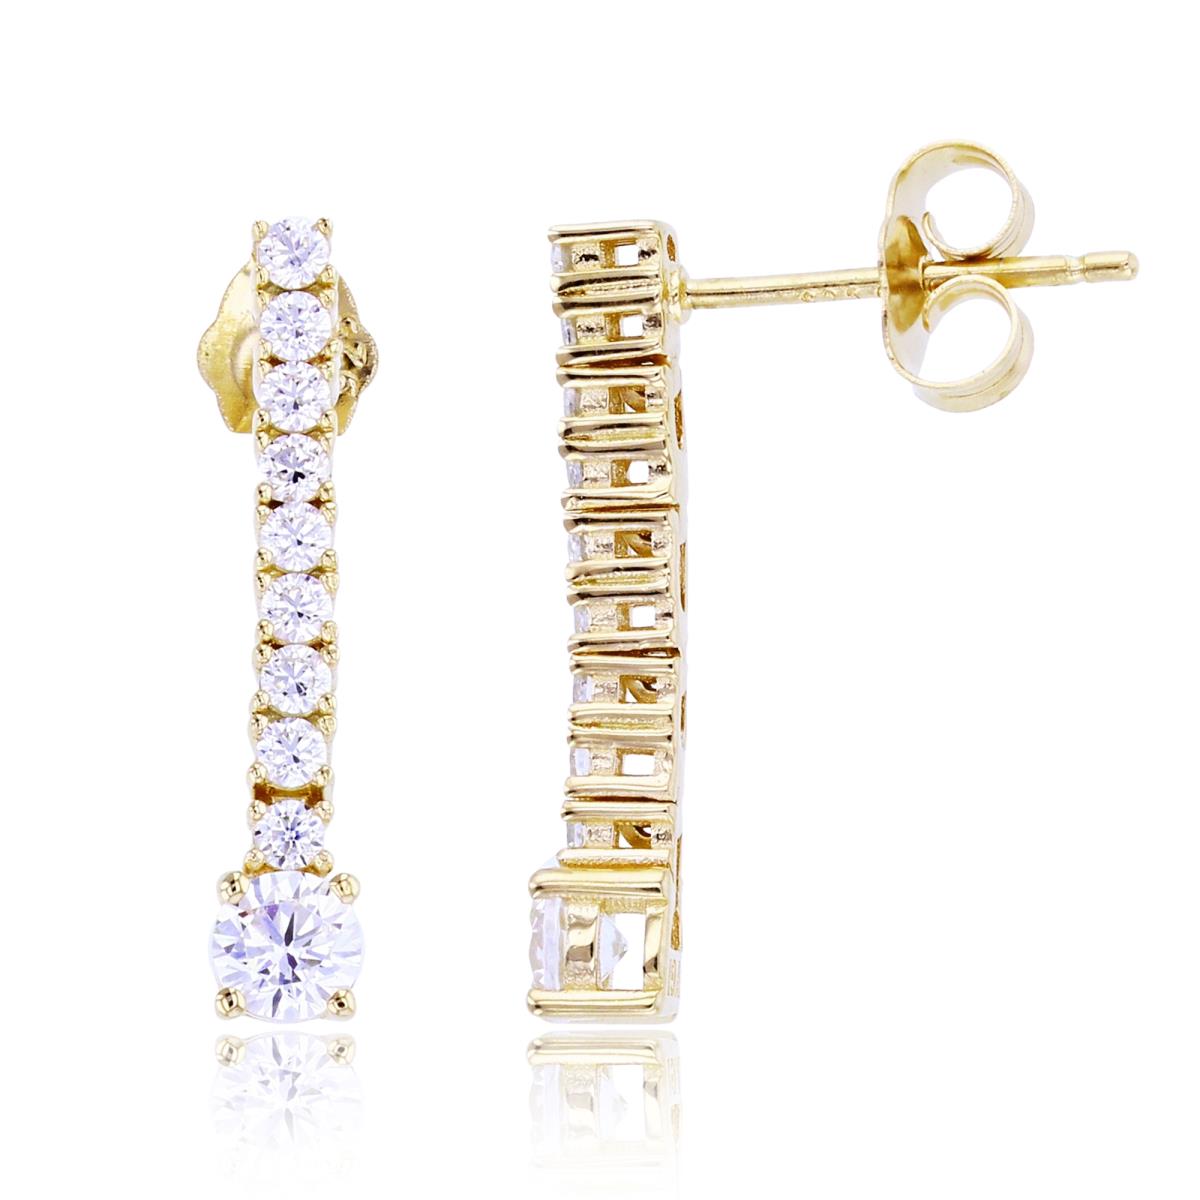 Sterling Silver+1Micron Yellow Gold Rnd CZ Flexy Vertical Row Earrings